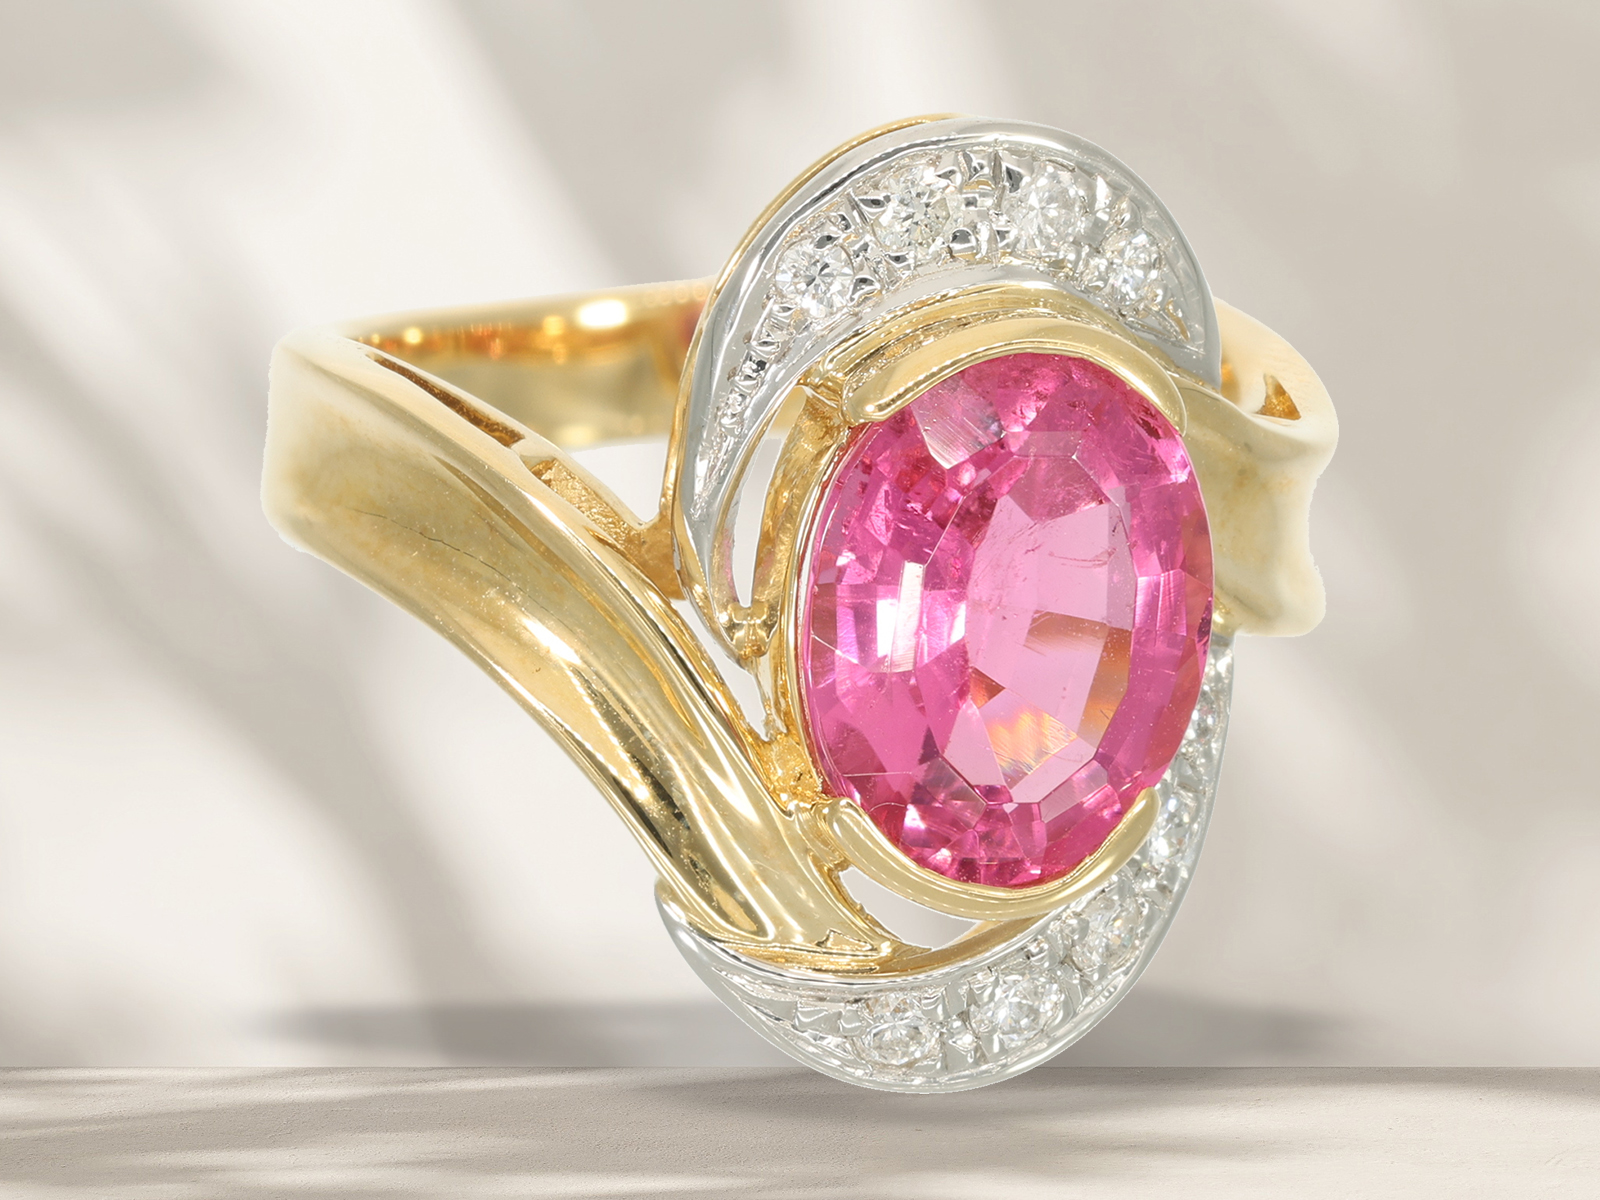 Ring: goldsmith ring with a rare "intense pink" tourmaline and brilliant-cut diamonds - Image 4 of 5